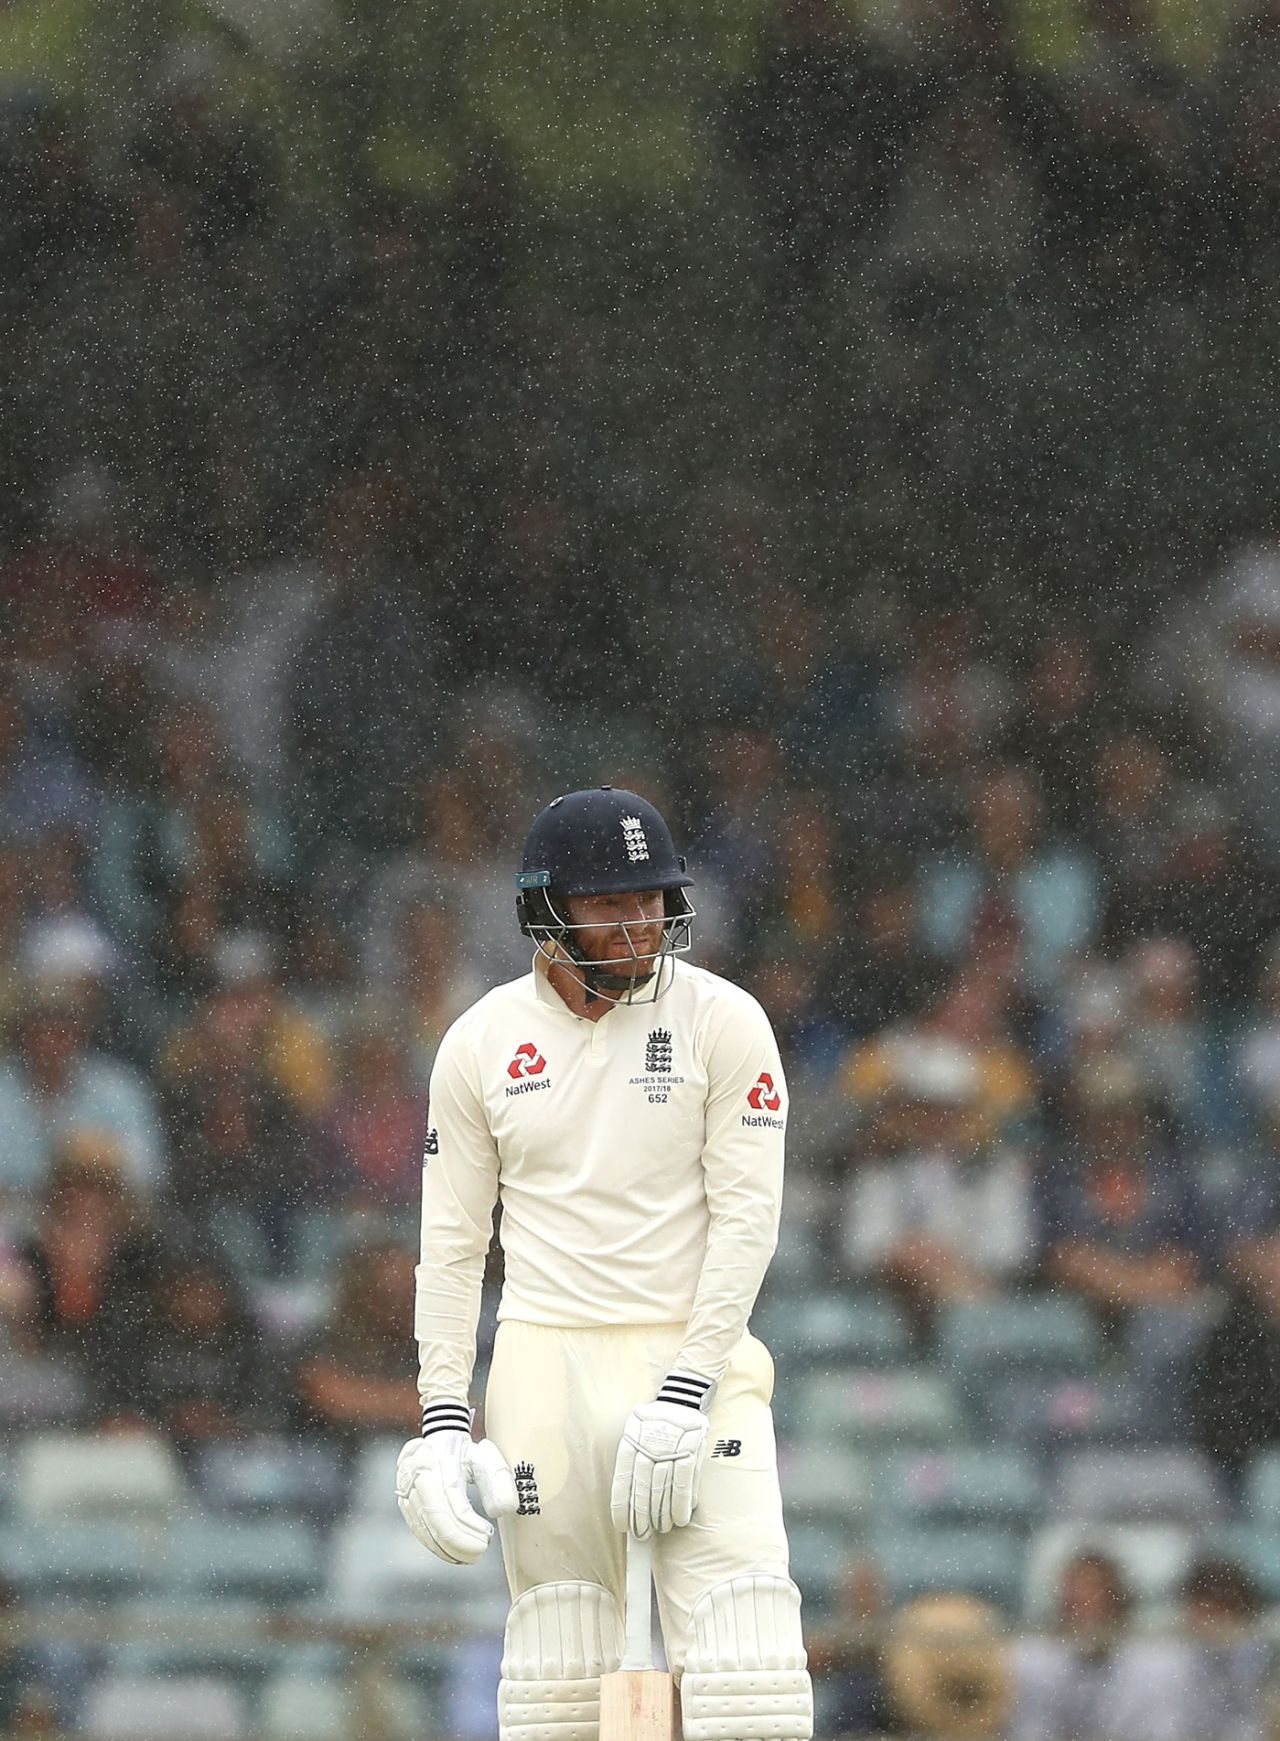 Jonny Bairstow prepares to face as the rain comes down, Australia v England, 3rd Test, Perth, 4th day, December 17, 2017